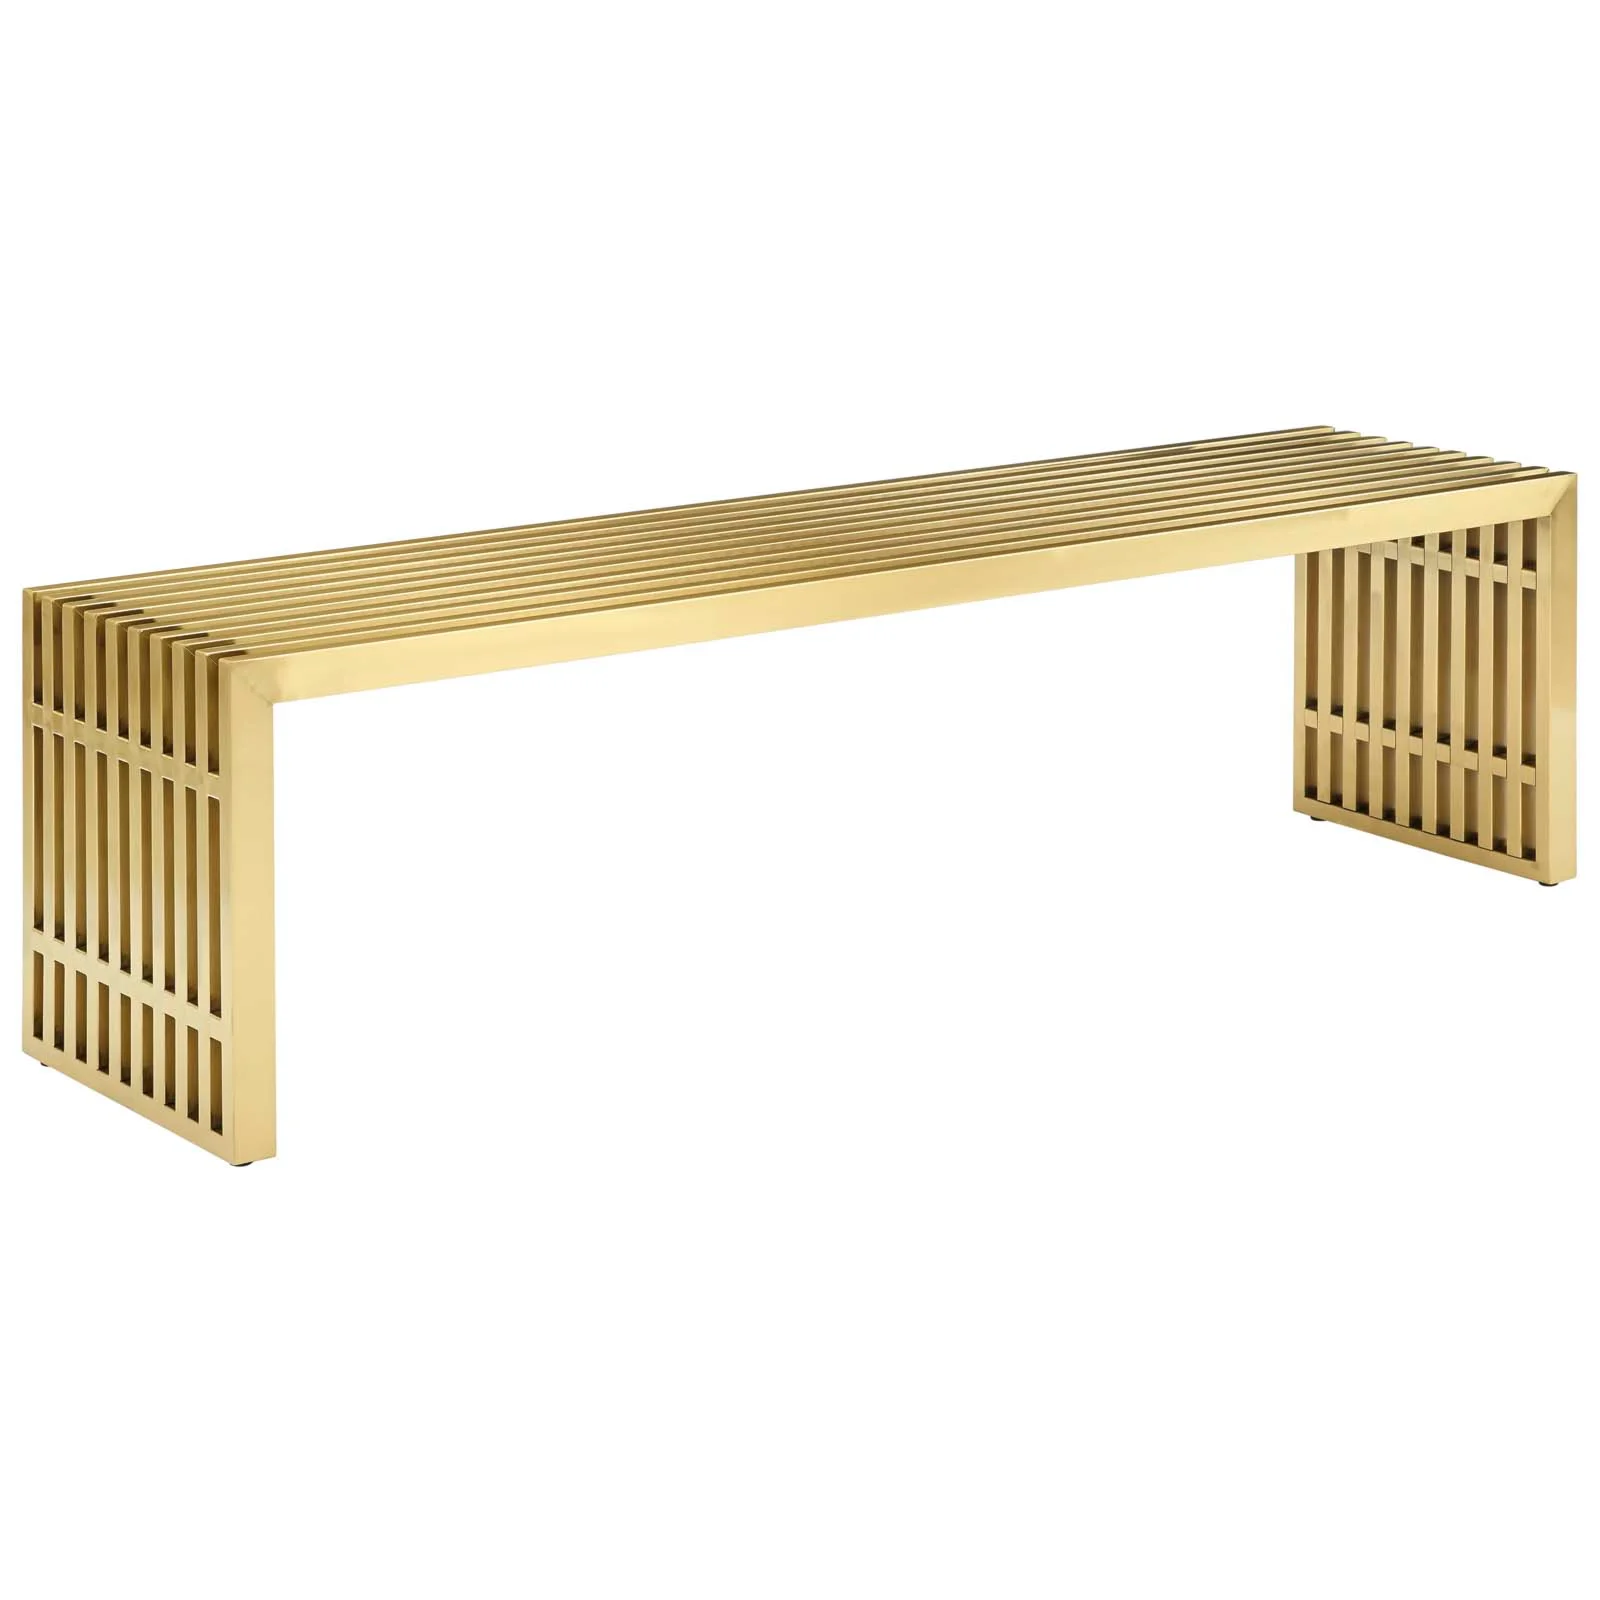 Modway EEI-3036-GLD Gridiron Console Table in Brushed Gold